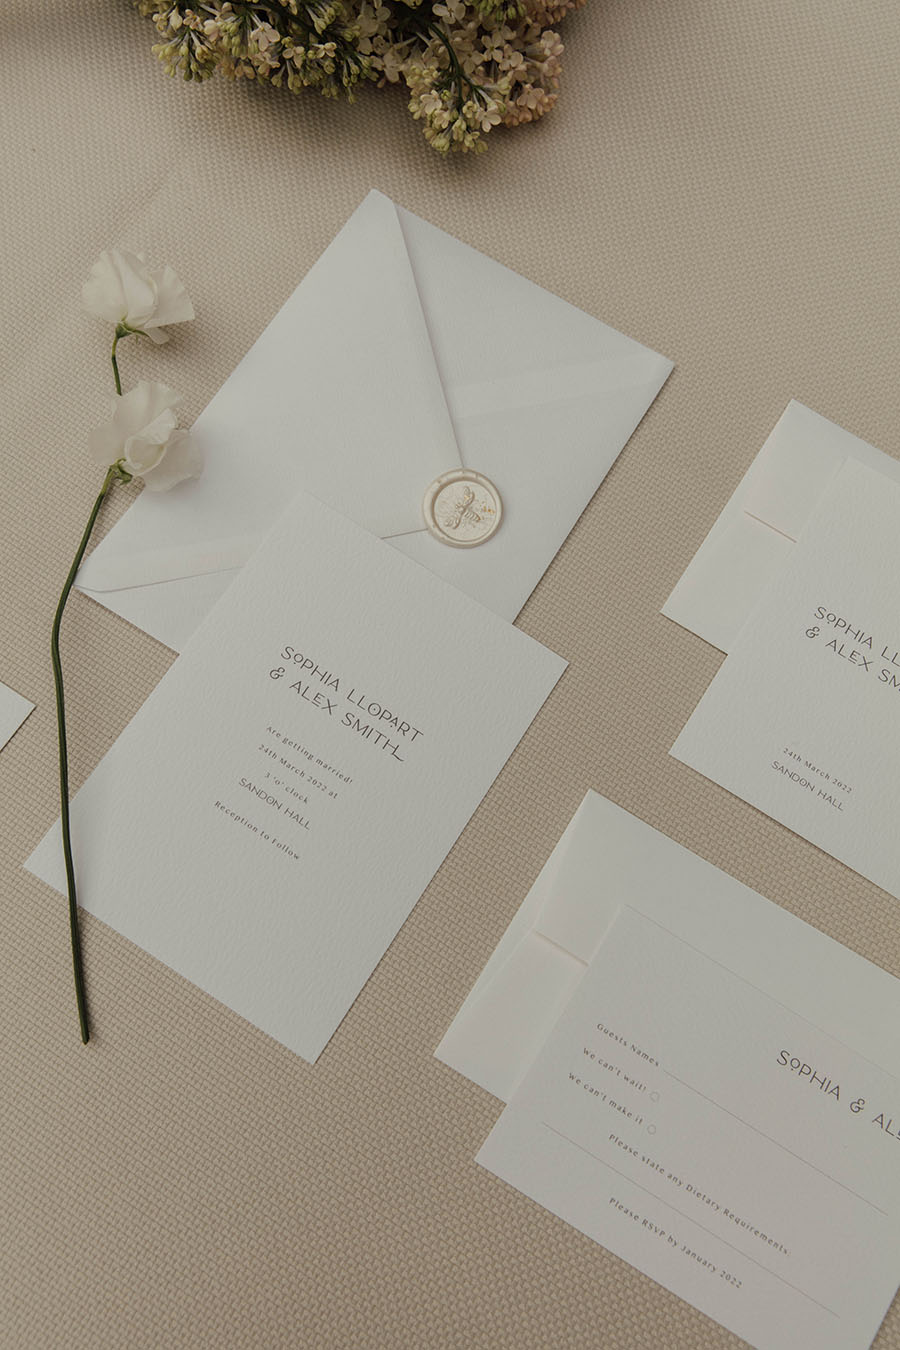 Wedding Inspiration: An Intimate, Minimalist Love Story Inspired by The ...